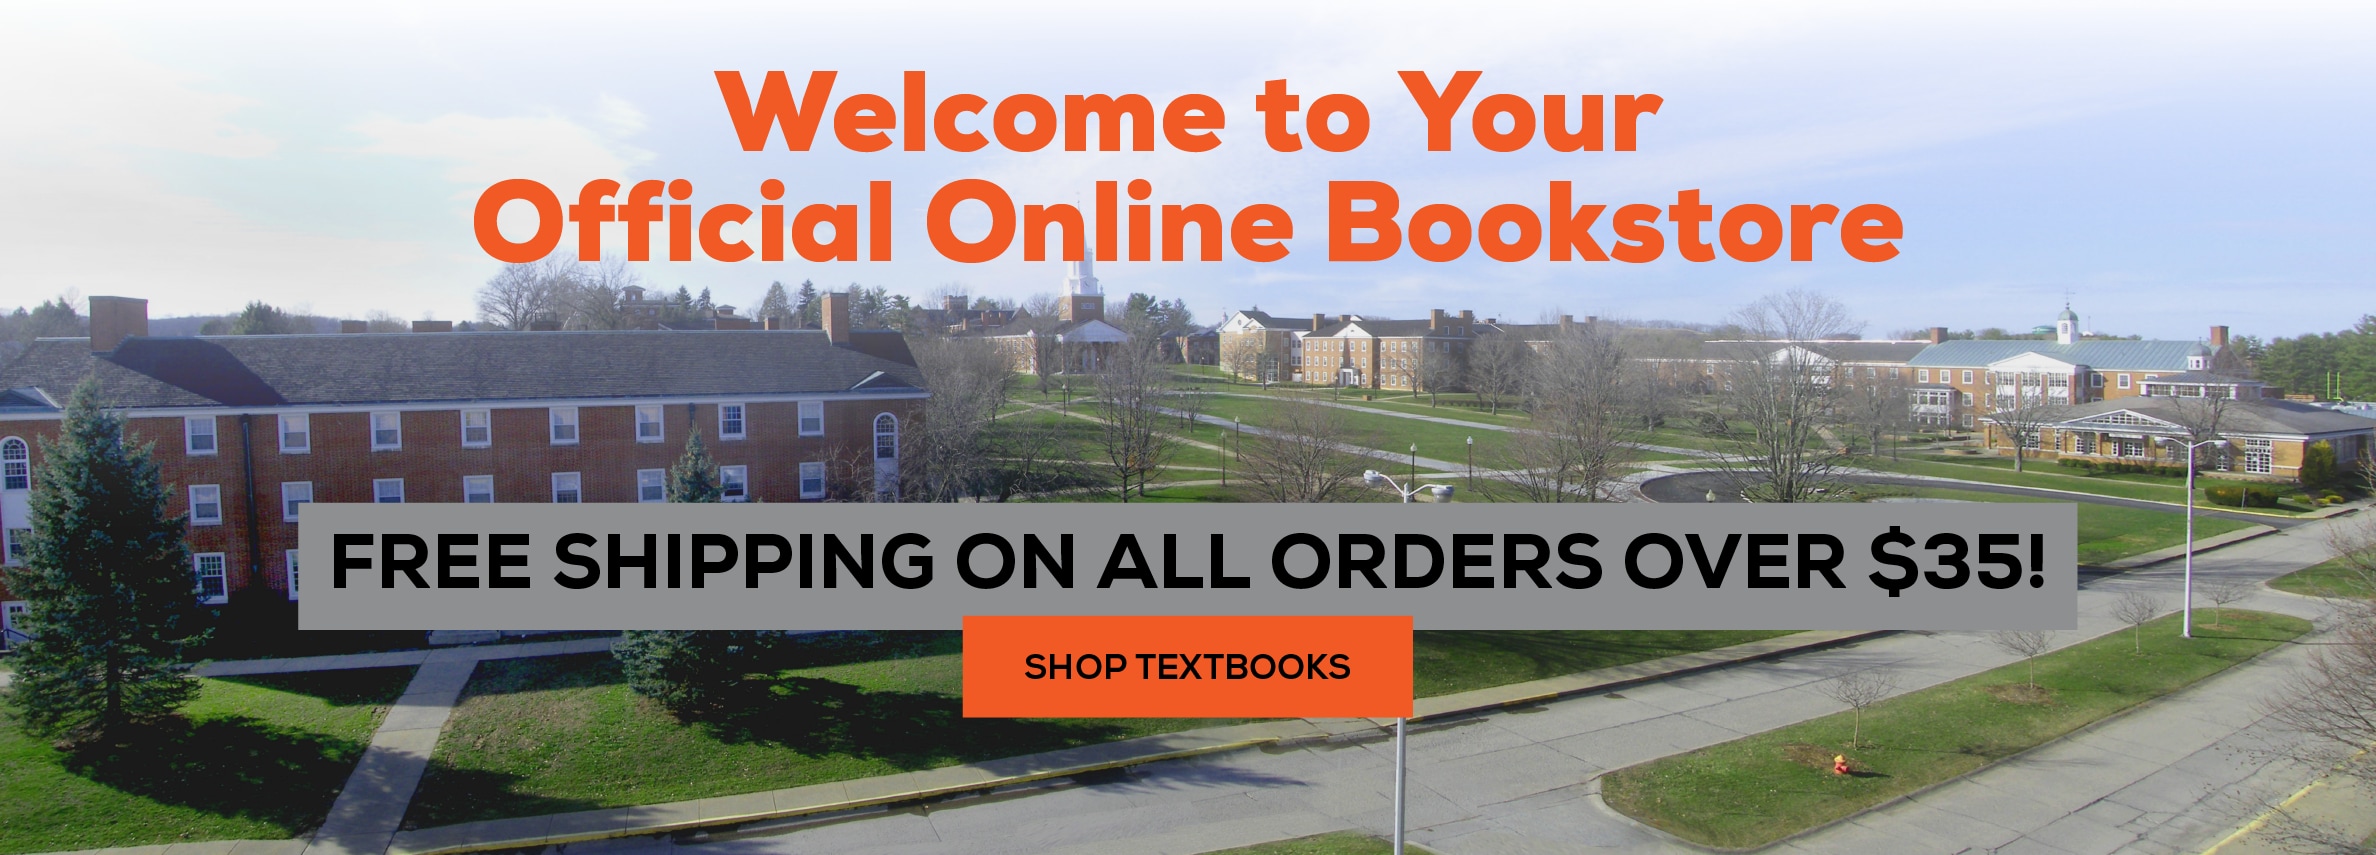 Welcome to your official online bookstore. Free shipping on all orders over $35!